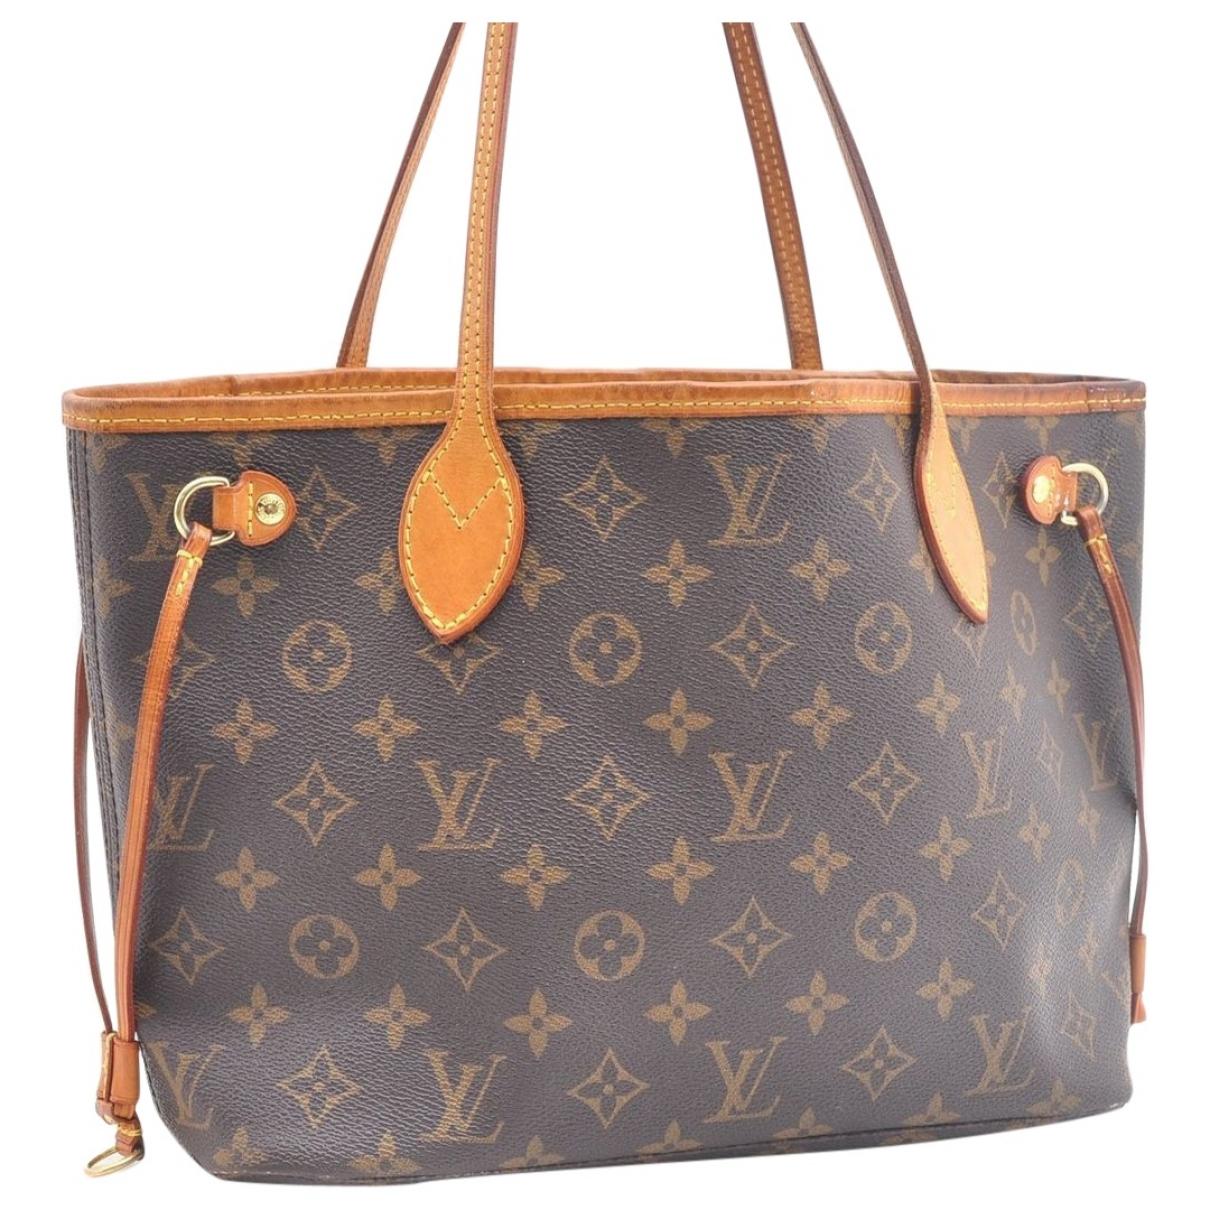 Lyst - Louis Vuitton Pre-owned Neverfull Brown Cloth Handbags in Brown